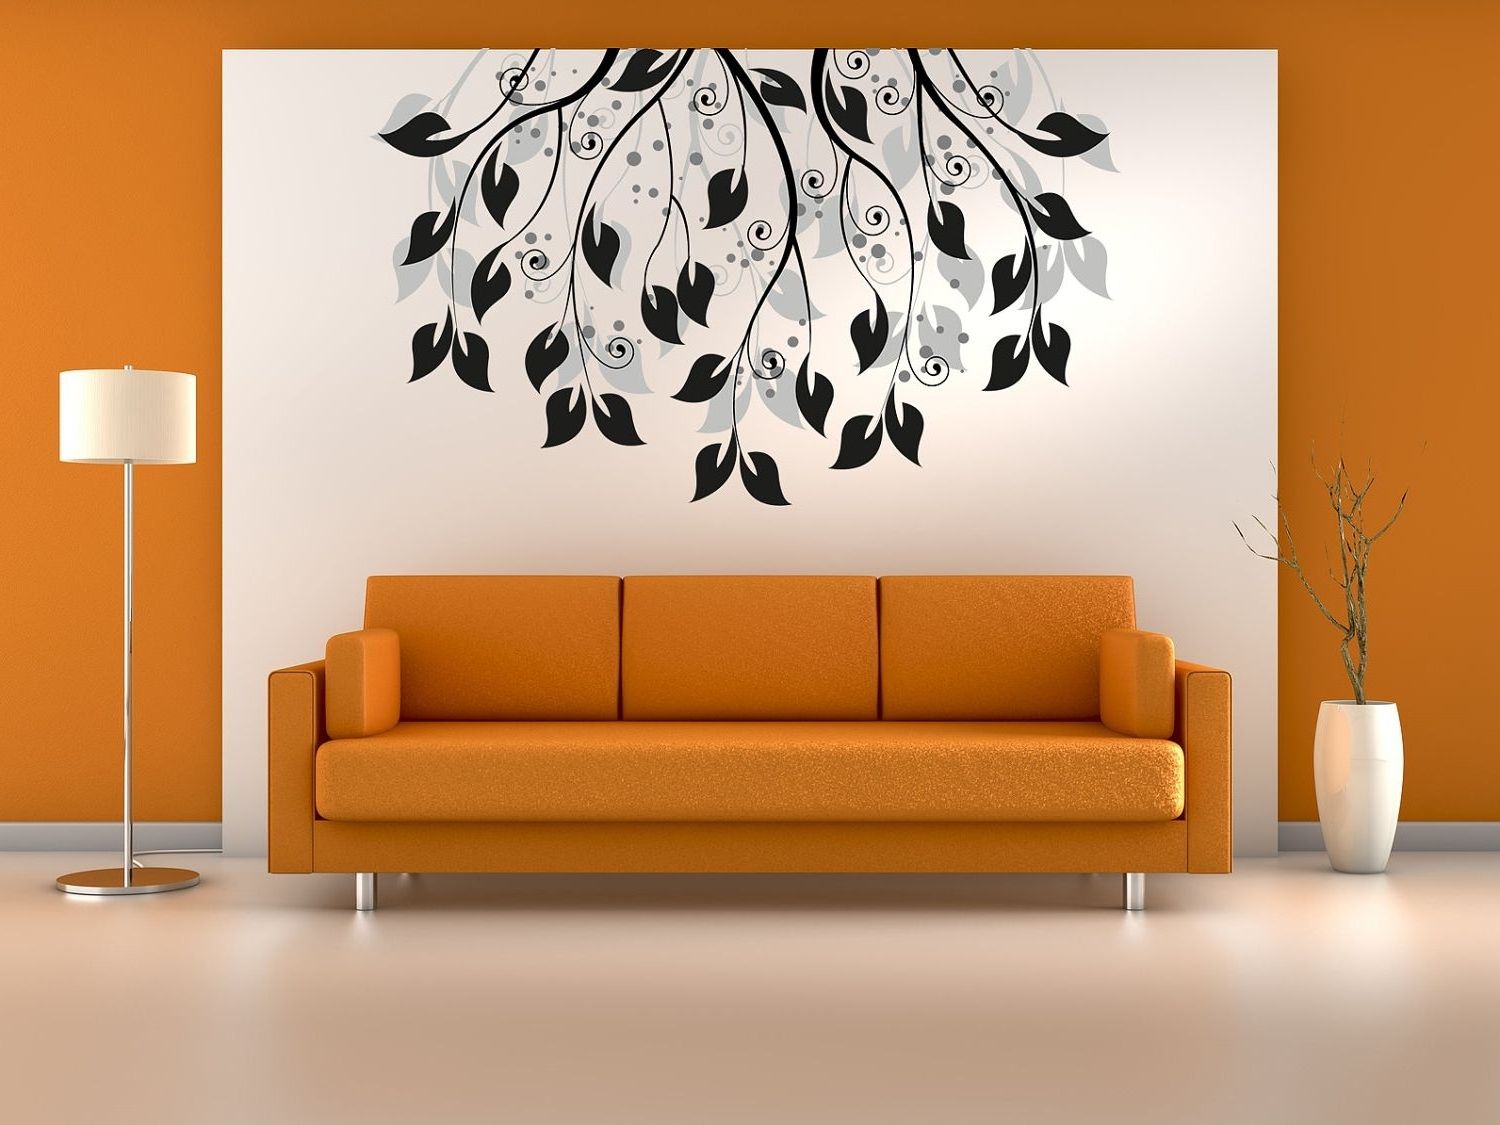 Newest Living Room Creative Painting Ideas For Walls With White Wall Pertaining To Living Room Painting Wall Art 